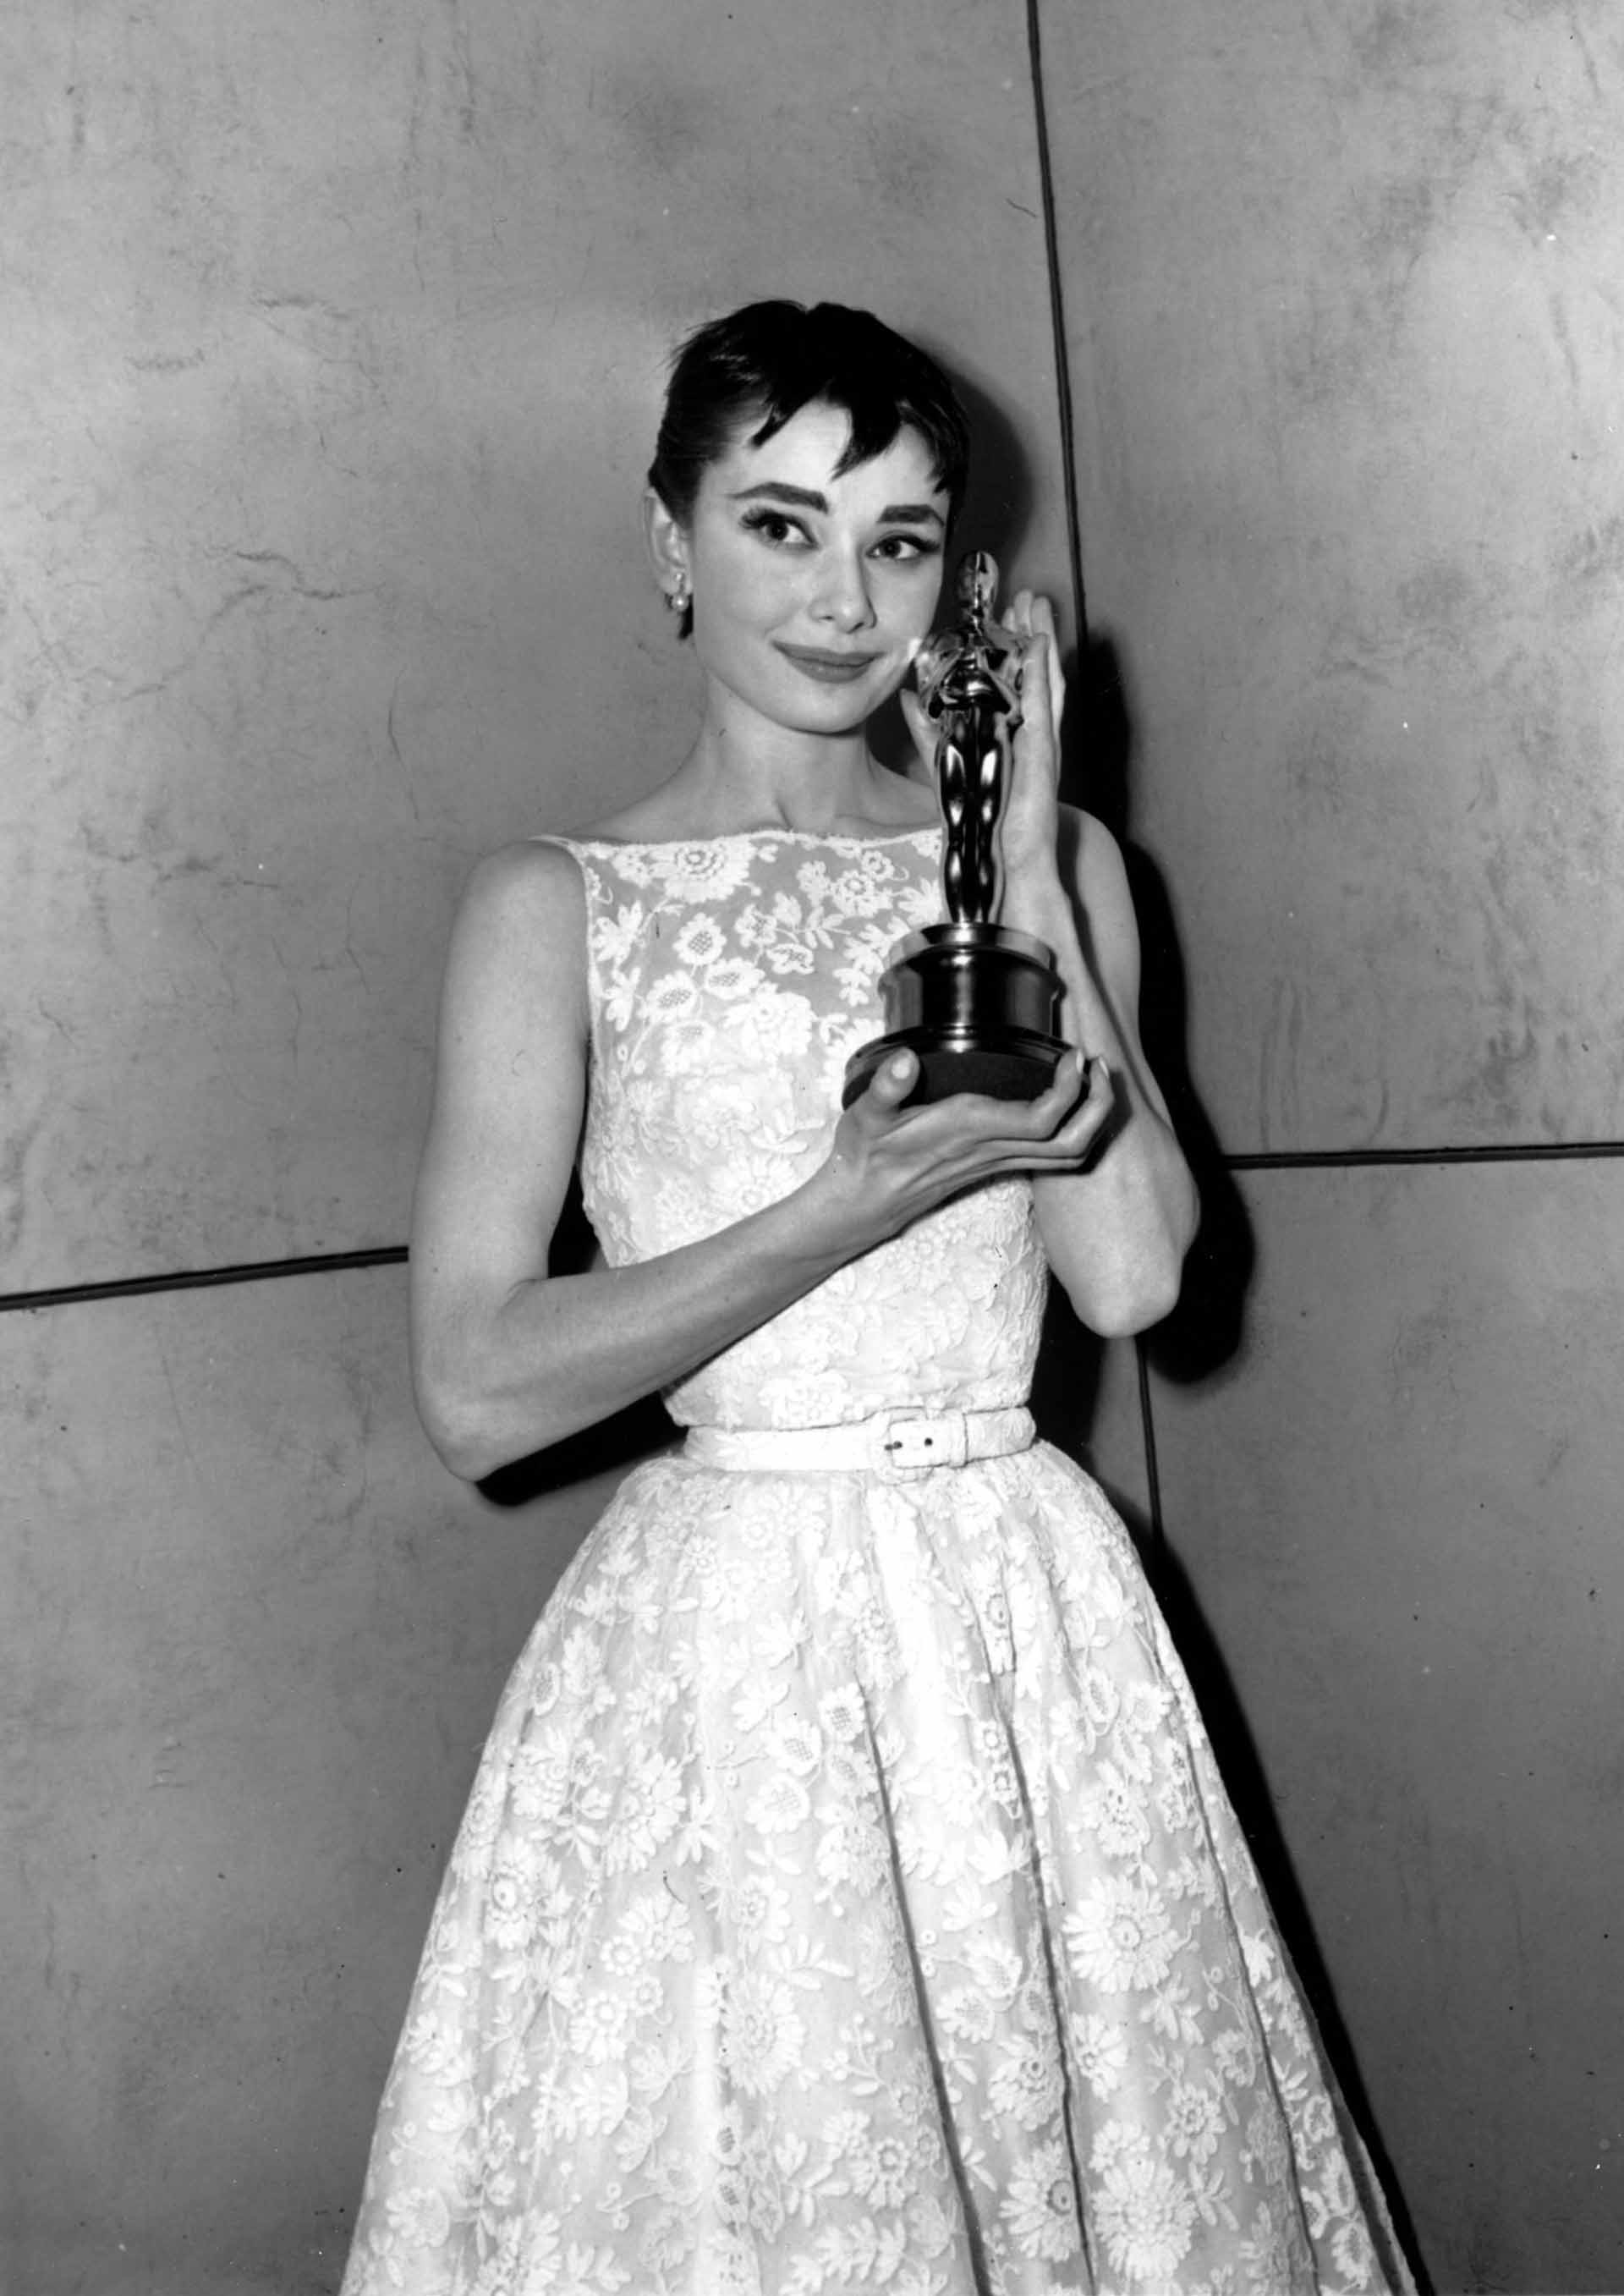 Audrey Hepburn poses with her statuette at the 26th Annual Academy Awards ceremony in New York on March 25, 1954.  Hepburn won for best actress for her portrayal in "Roman Holiday."